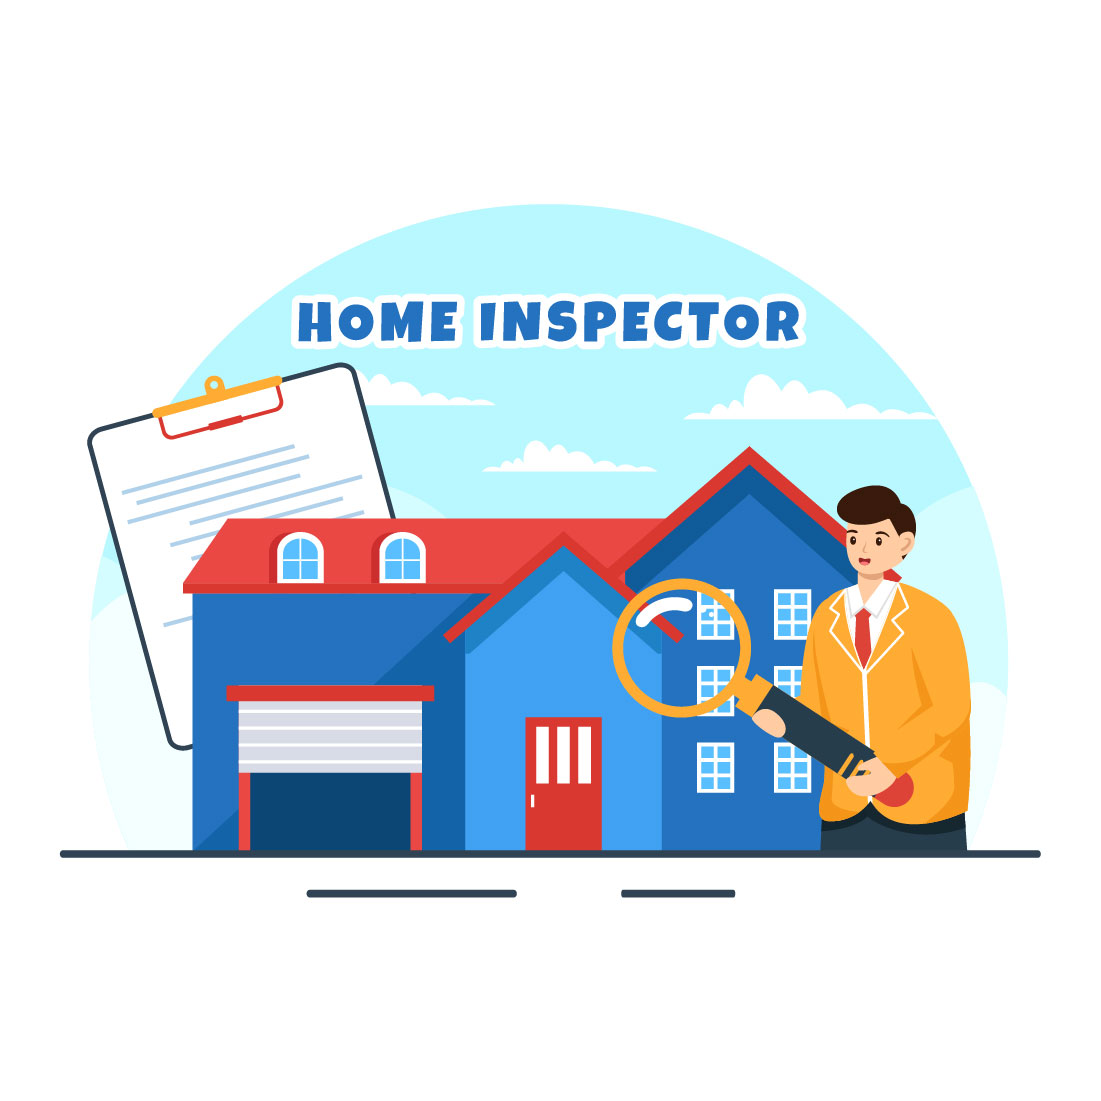 12 Home Inspector Illustration preview image.